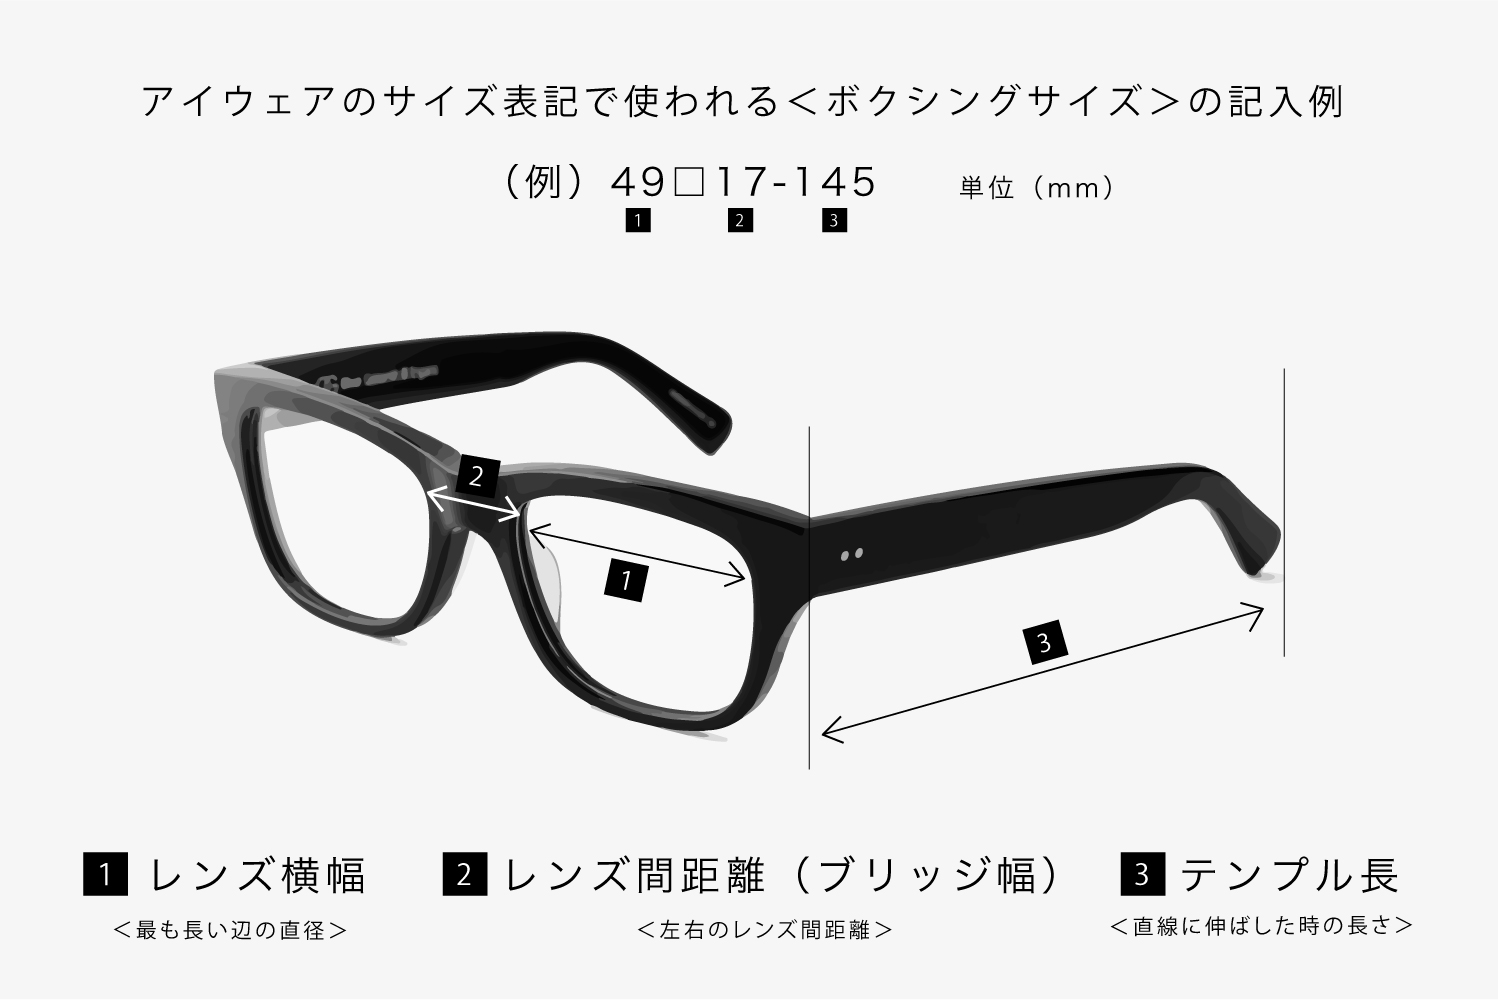 OLIVER PEOPLES THE ROW｜Board Meeting 2 OV1230ST - 5035Q8｜＊ESSENTIALS by Continuer〈Original Contents 〉